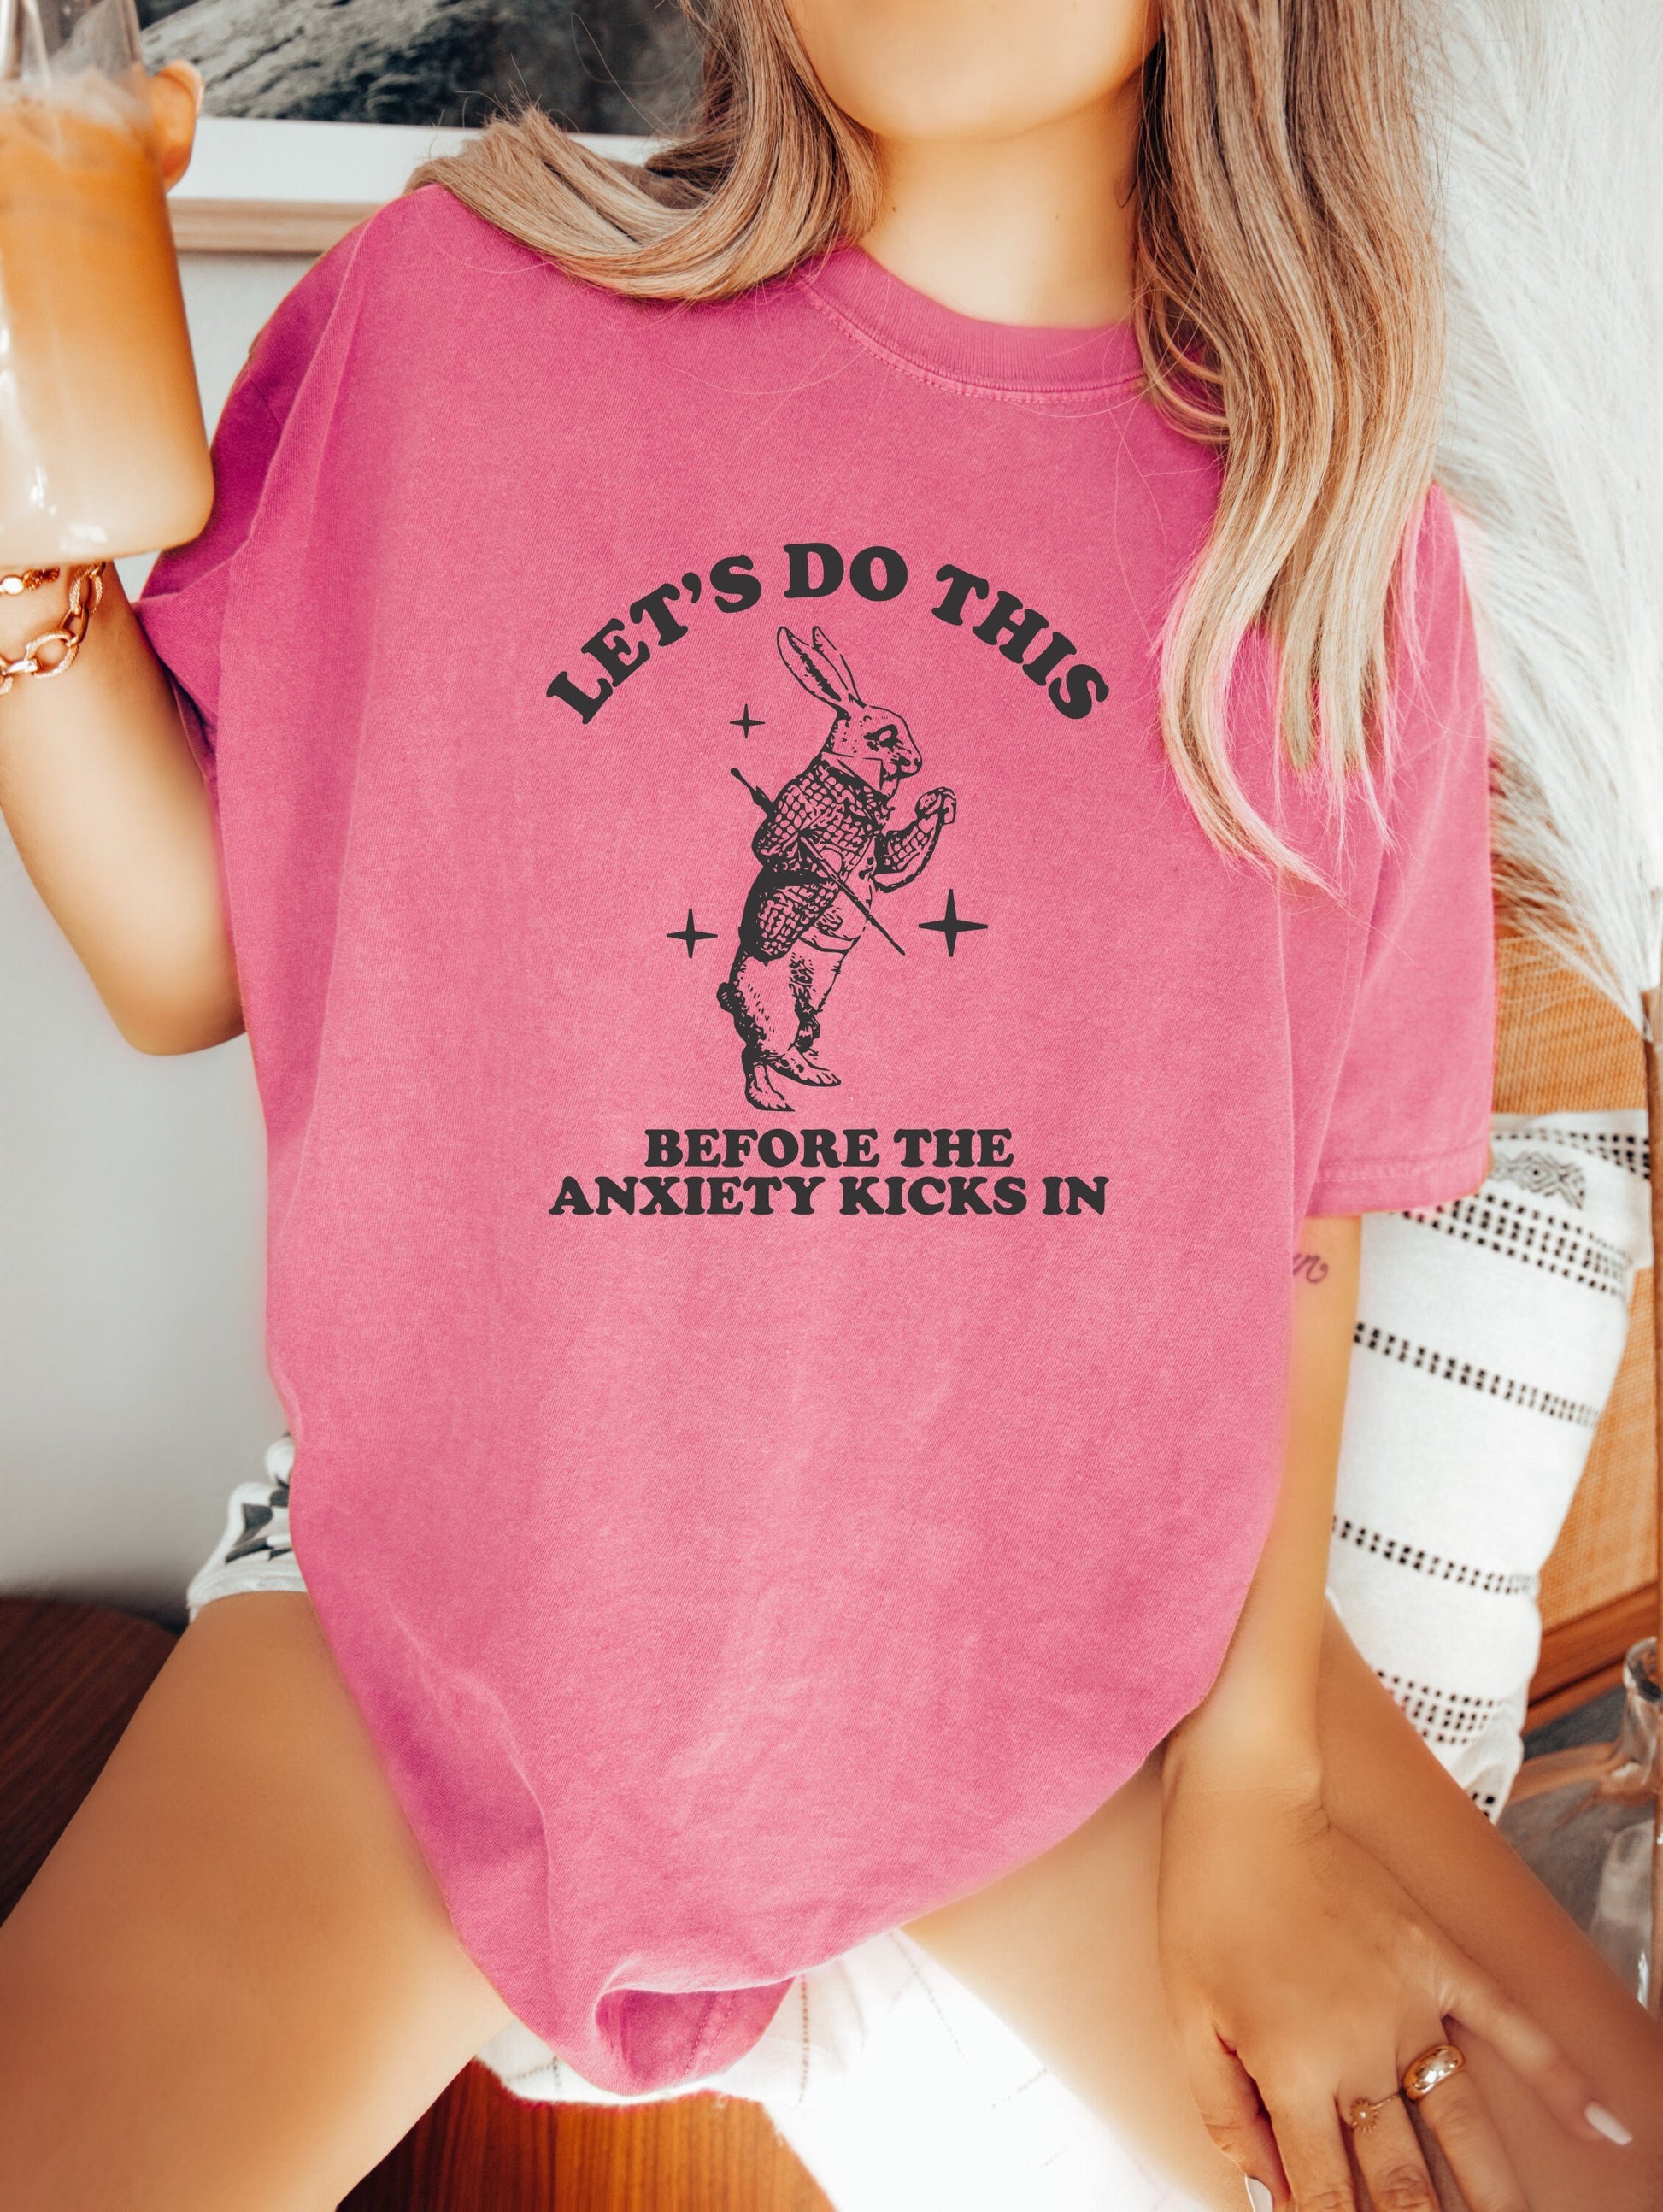 Let's Do This Before the Anxiety Kicks In Shirt, Mental Health Shirt, Oversized T-Shirt, Trendy Tee, Comfort Colors Shirt, Anxiety Shirt